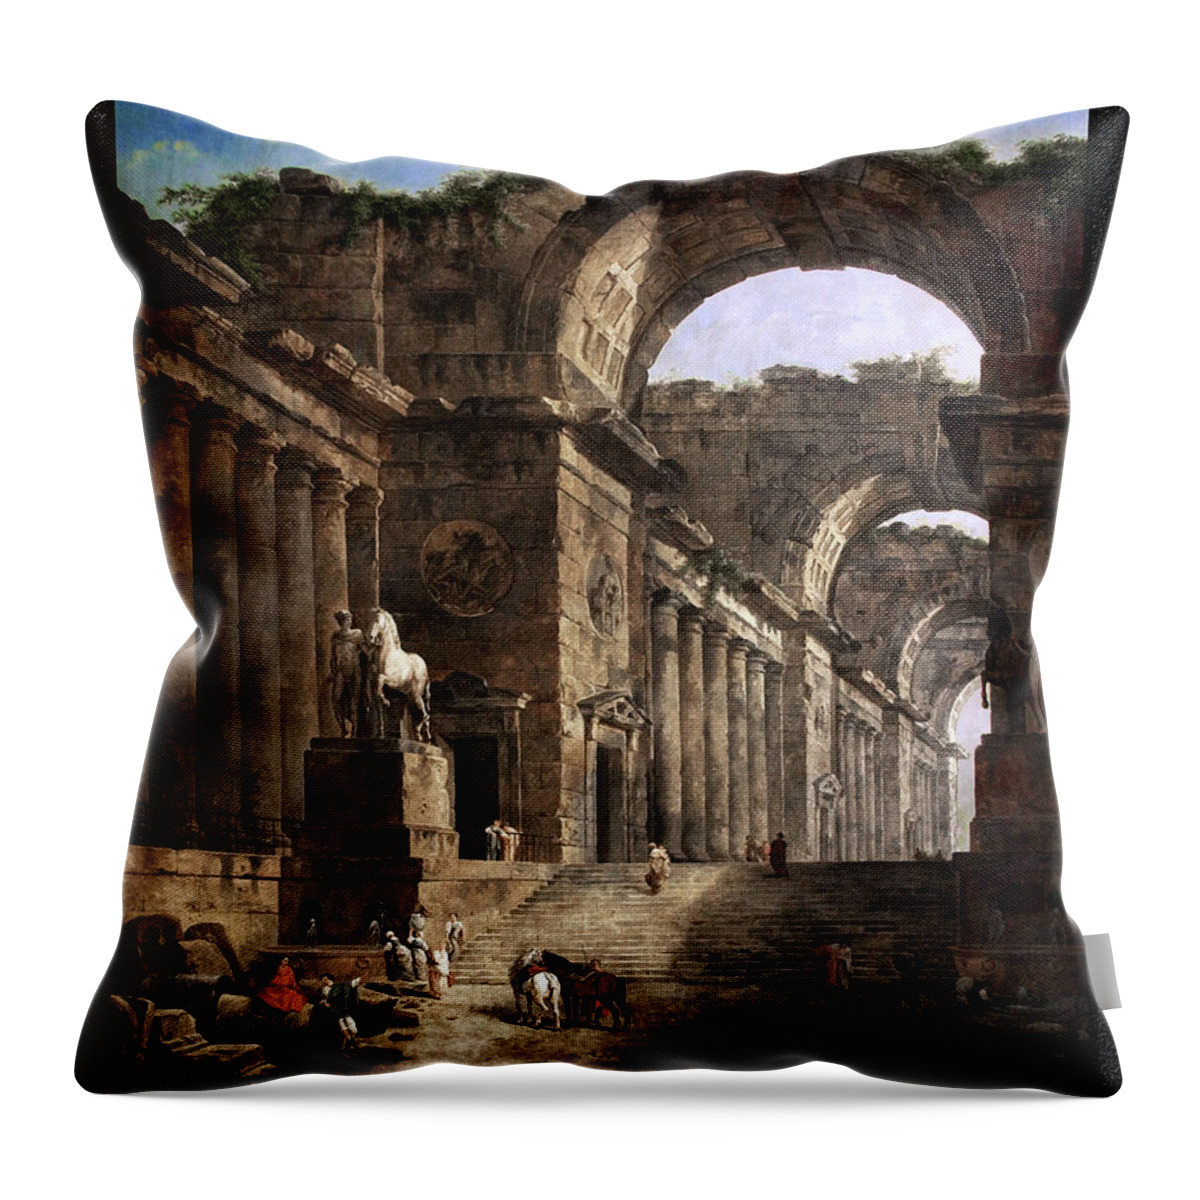 The Fountain Throw Pillow featuring the painting The Fountains by Hubert Robert by Rolando Burbon